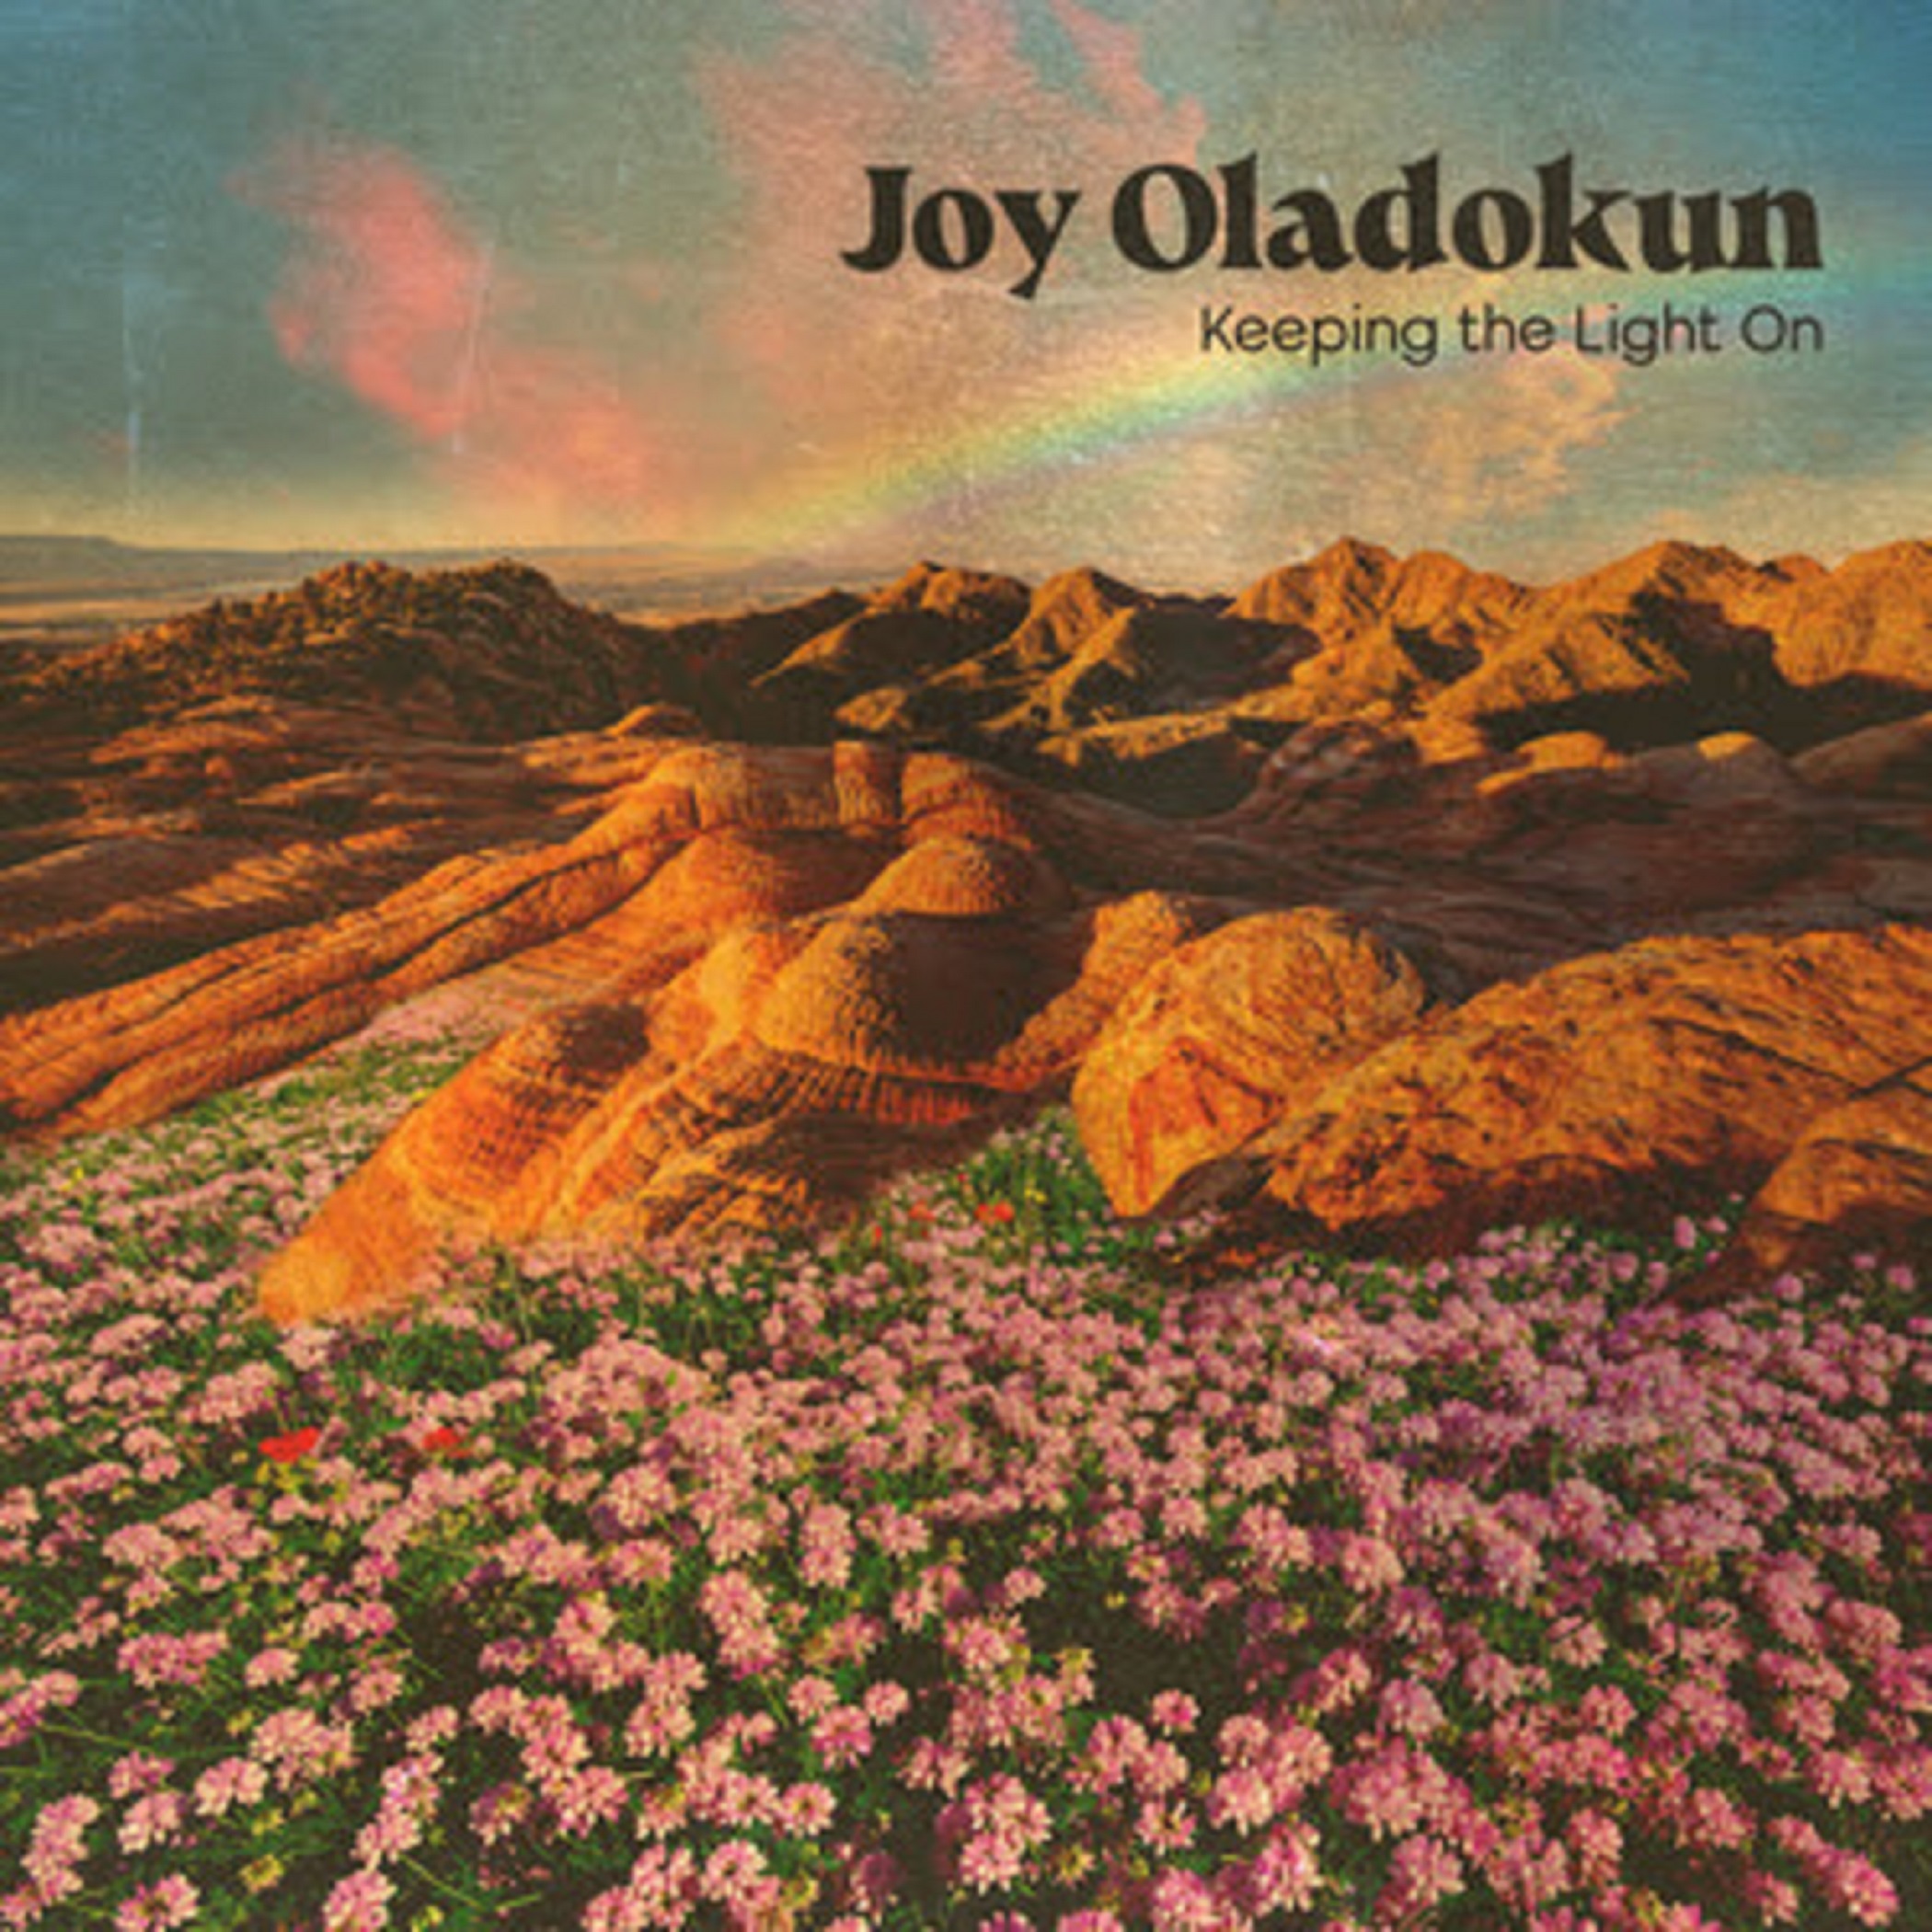 Joy Oladokun’s new song “Keeping the Light On” debuts today